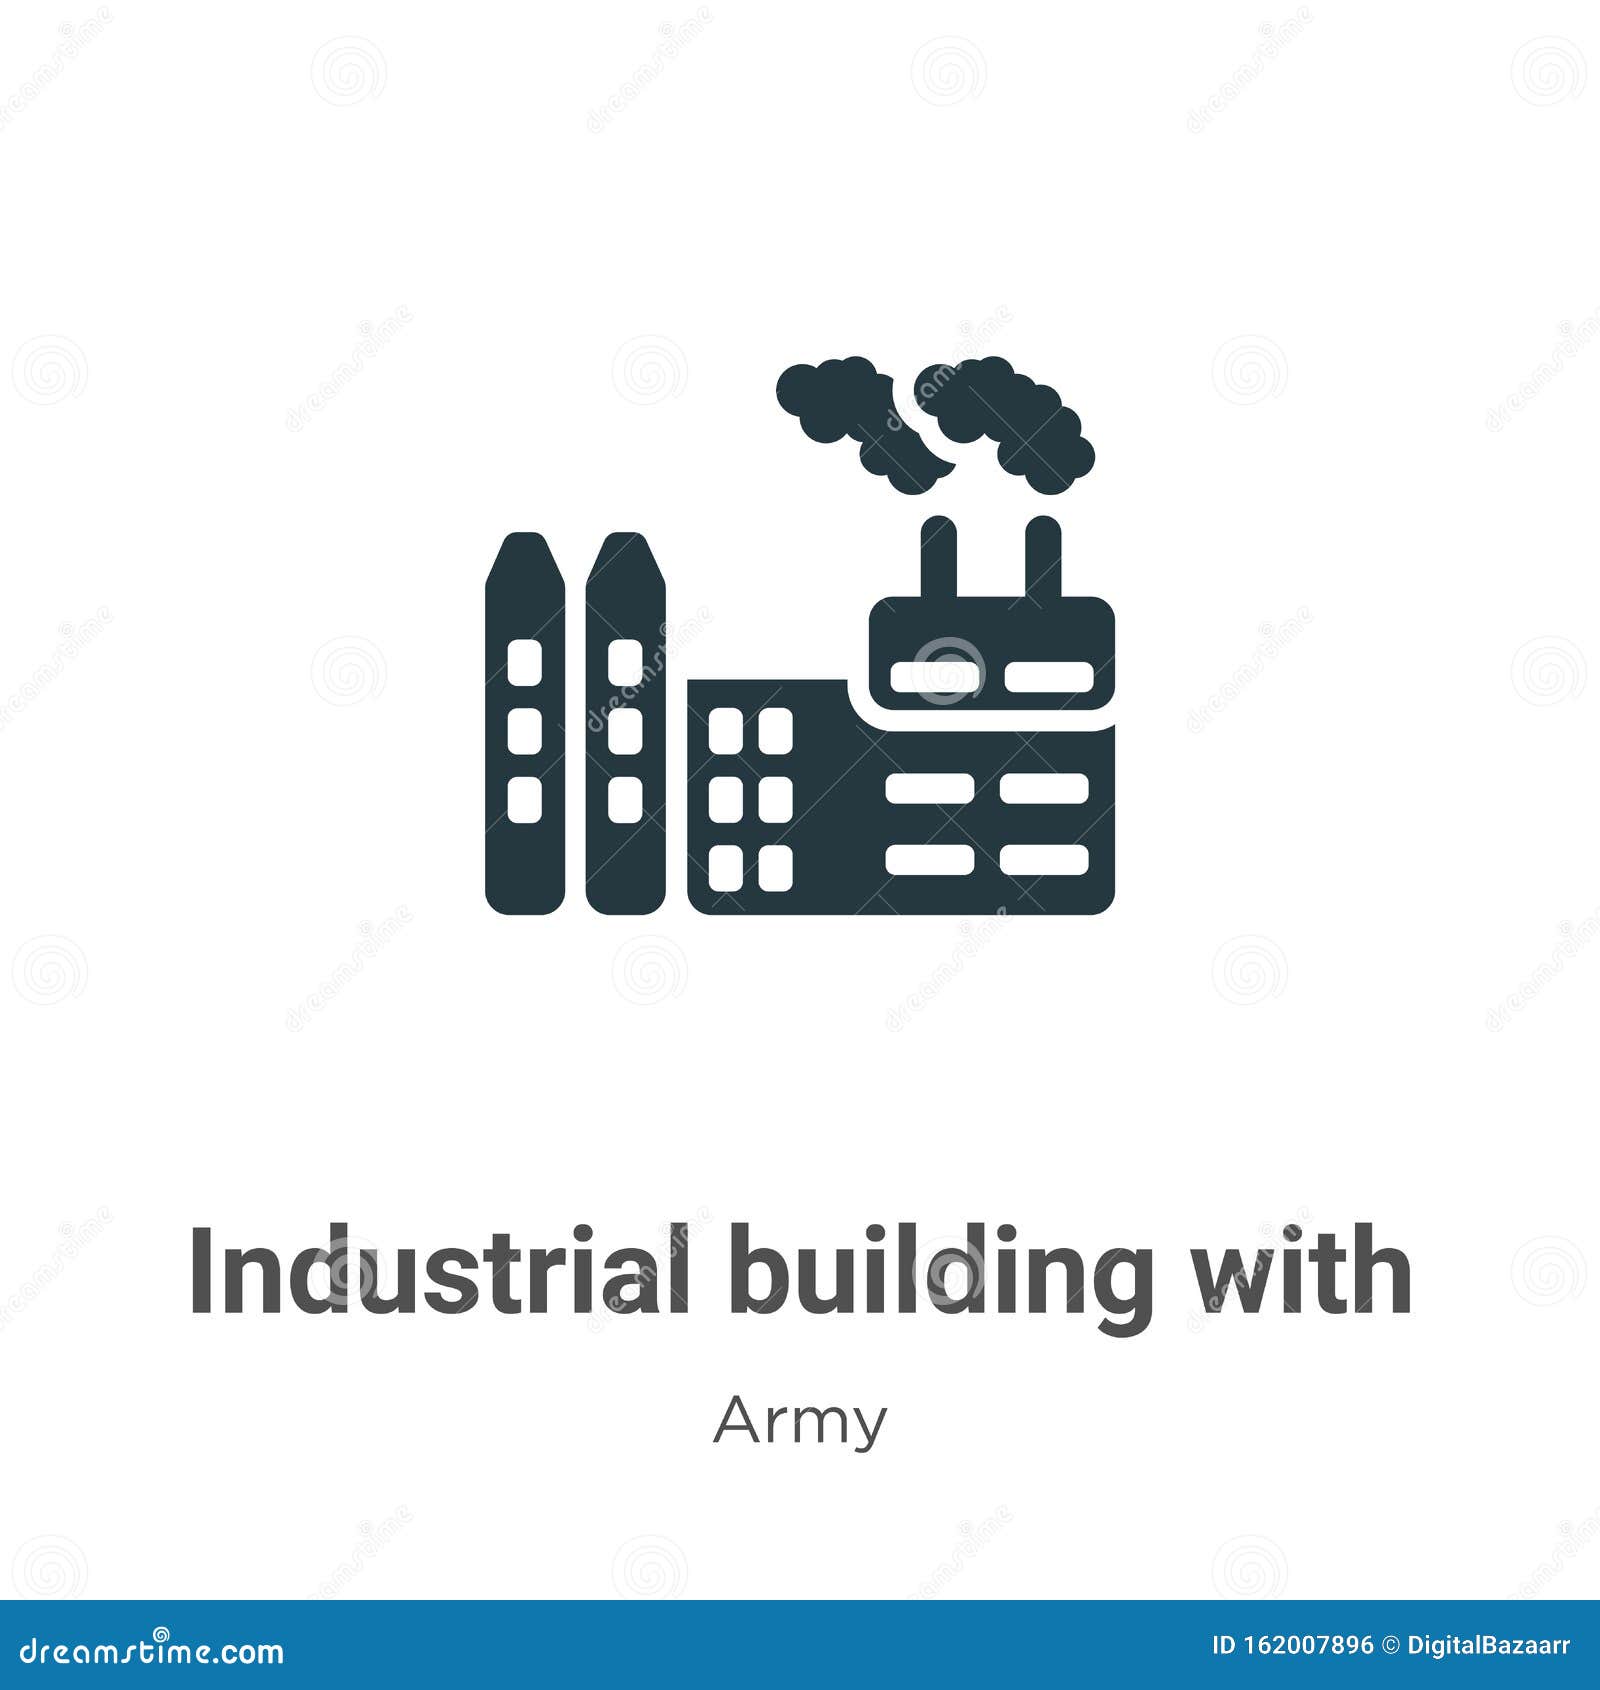 industrial building with contaminants  icon on white background. flat  industrial building with contaminants icon